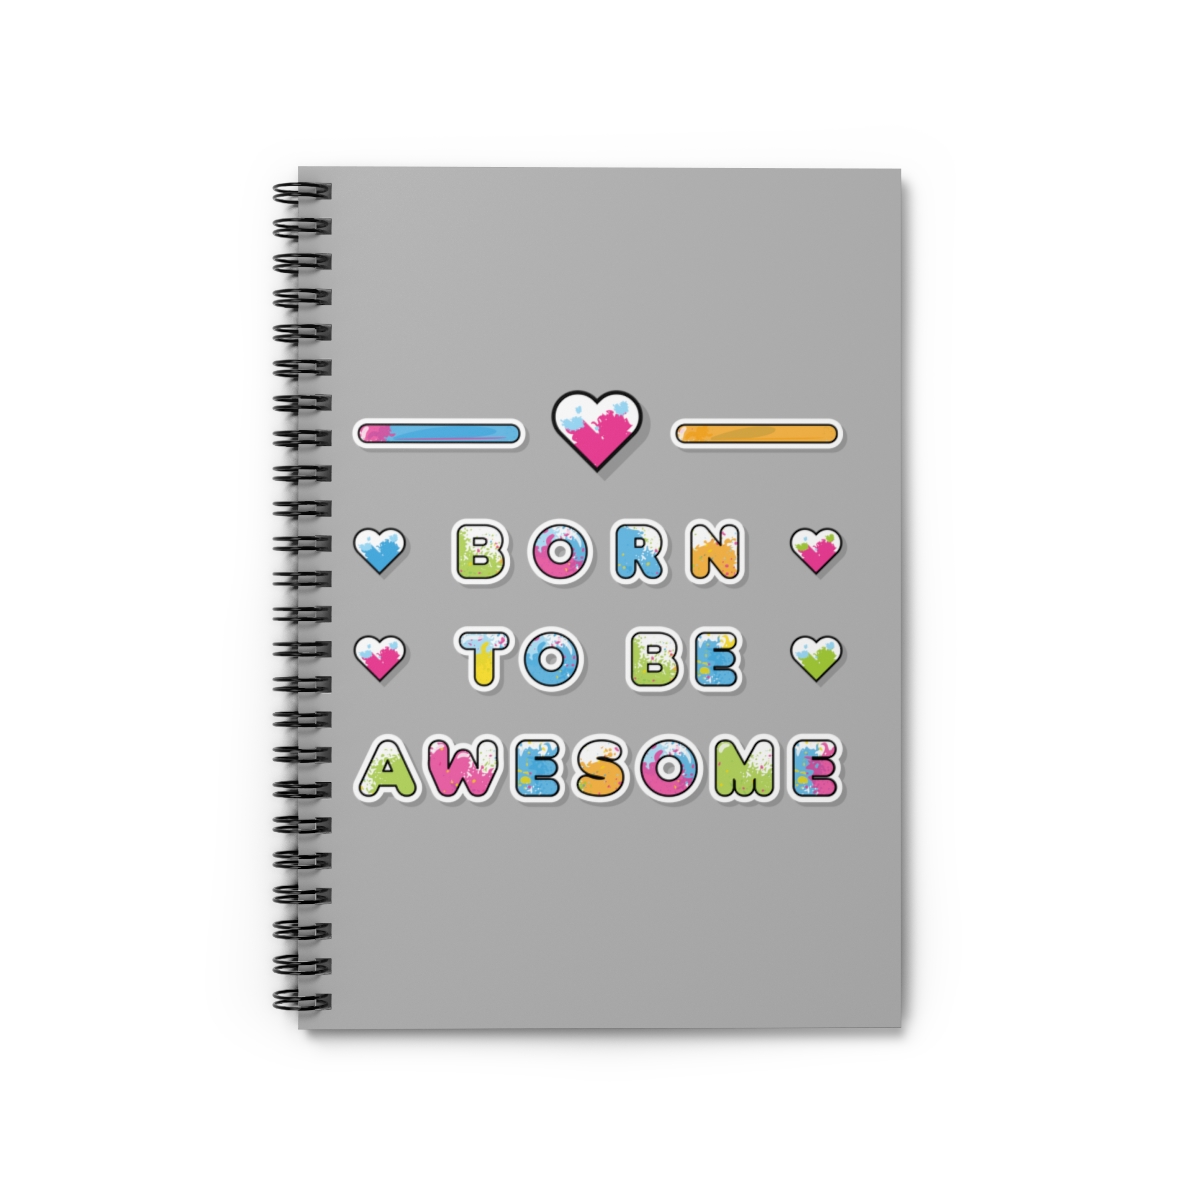 You are Awesome Spiral Notebook product thumbnail image